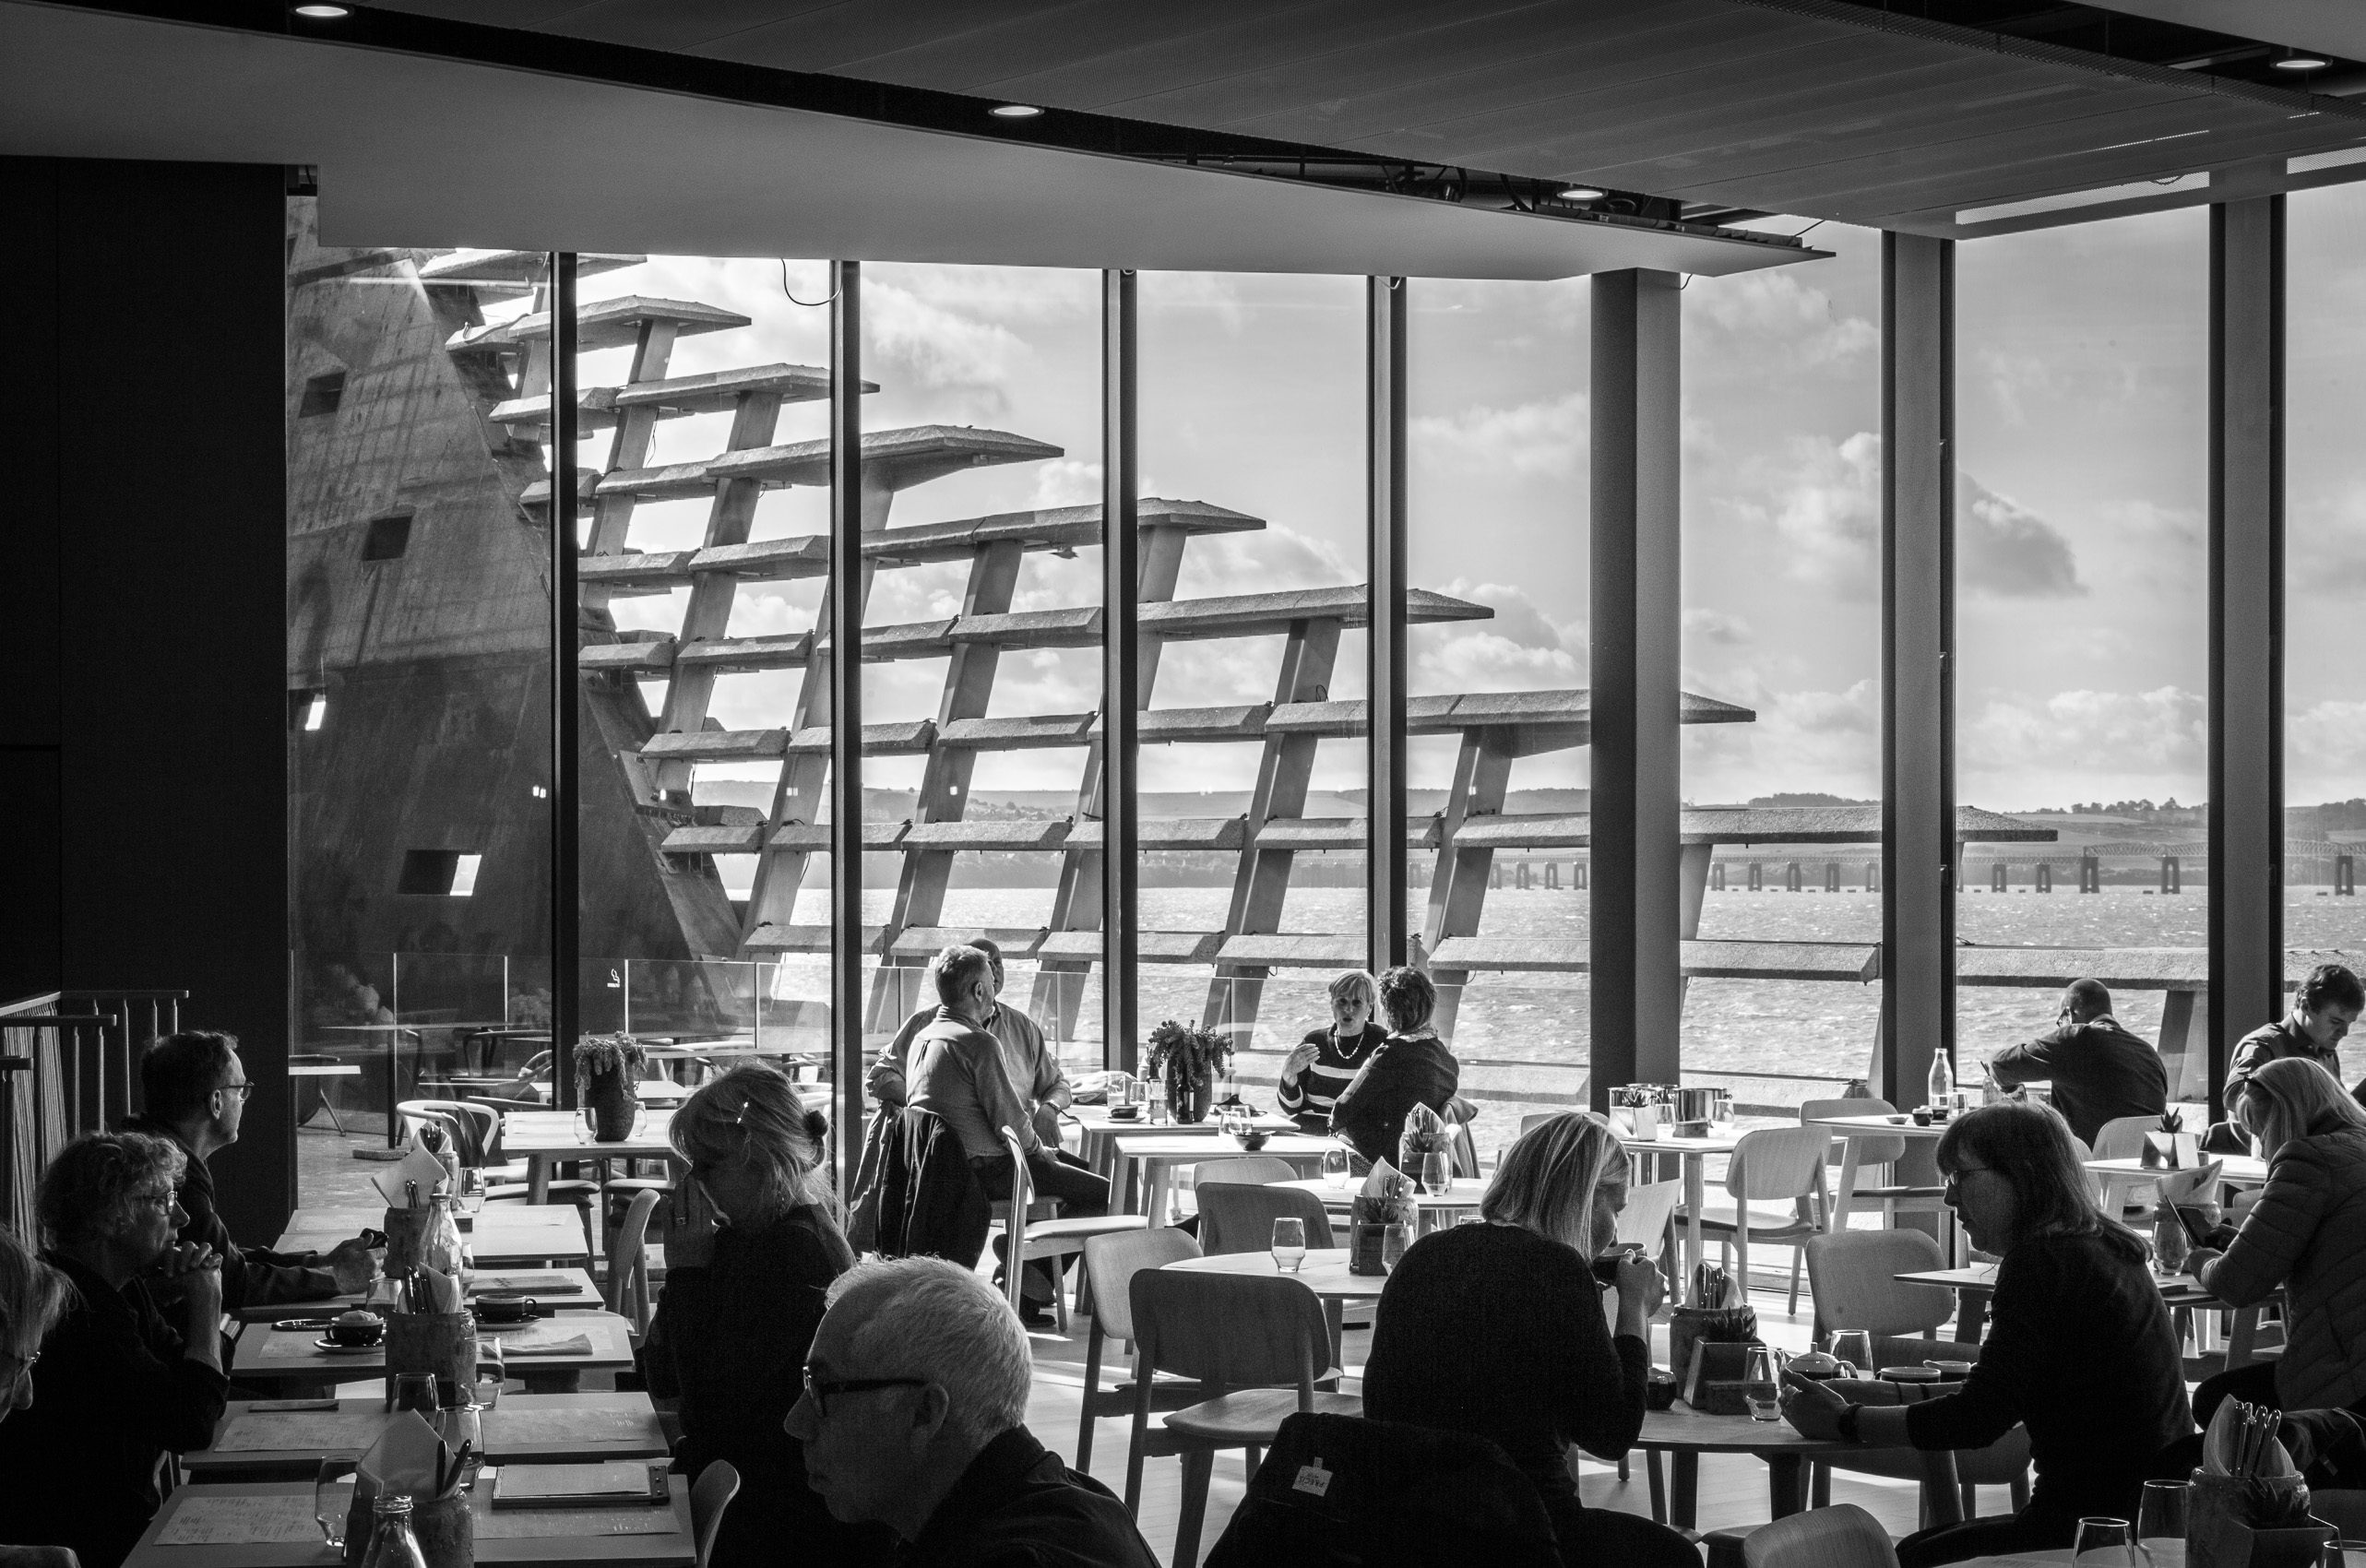 Restaurant in the V&A Dundee Building, Dundee, Scotland. DD030